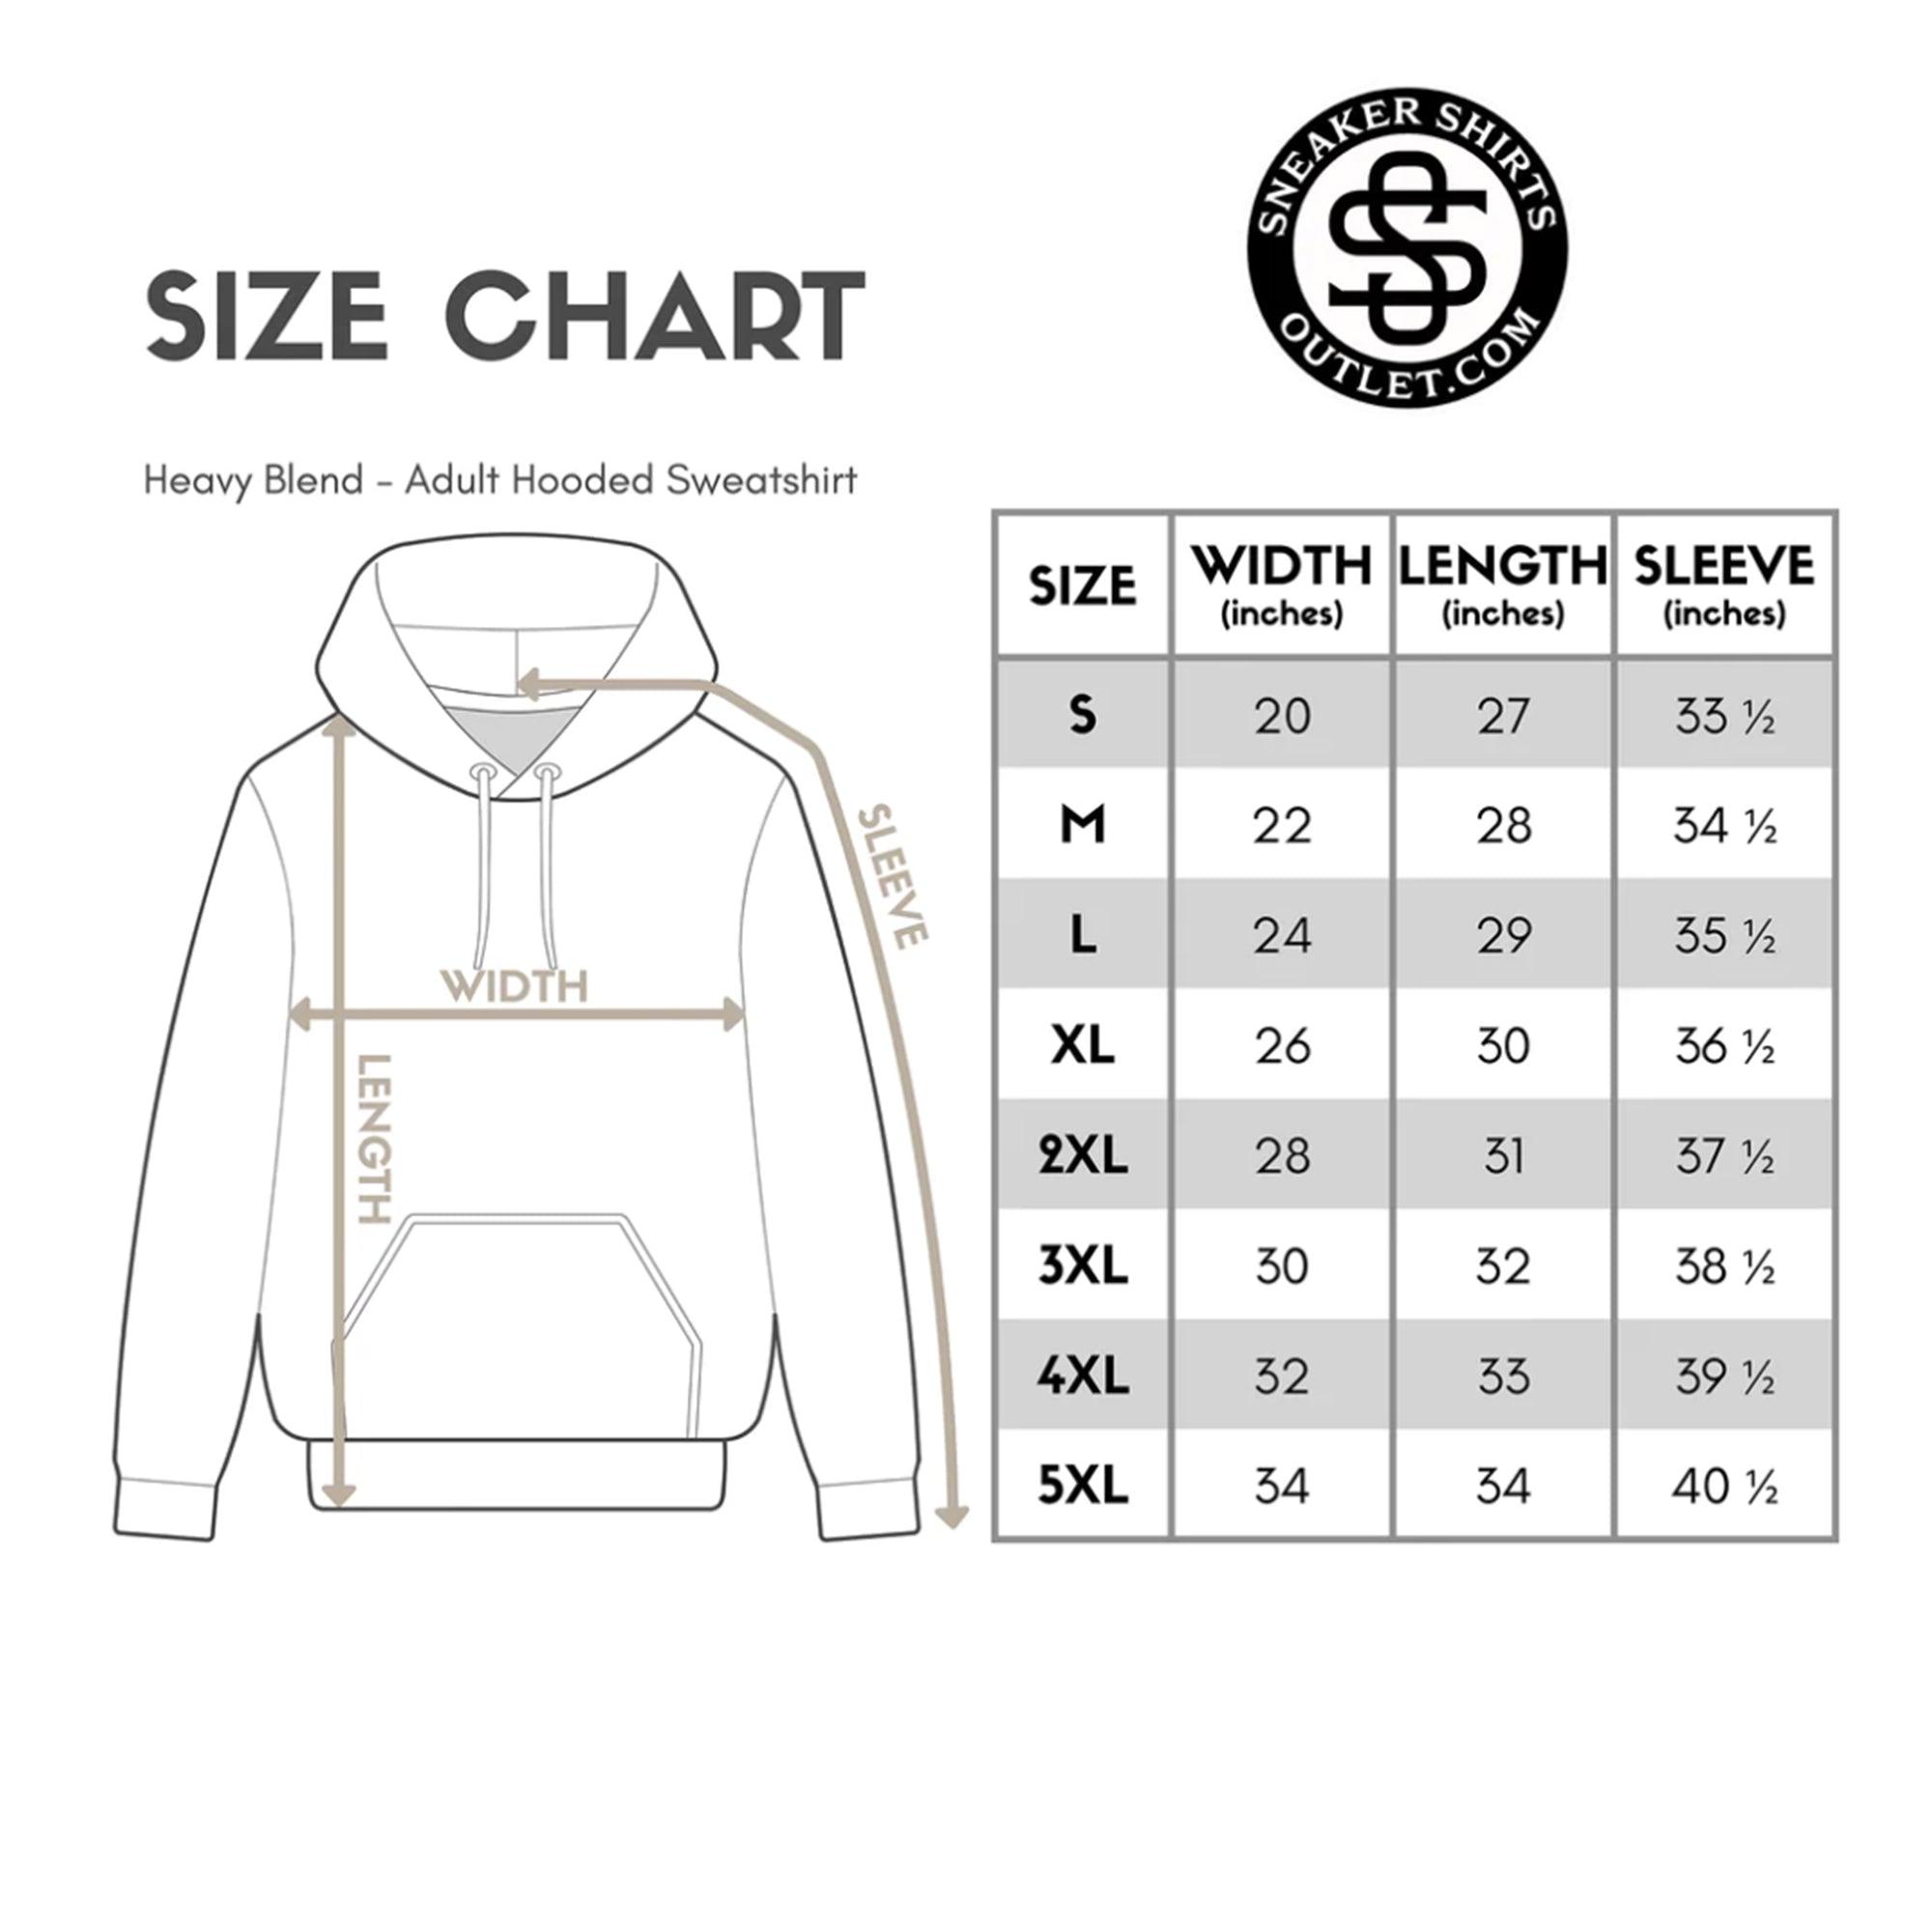 size chart Rags To Riches Hoodie Yeezy Boost 700s Bright Blue photo